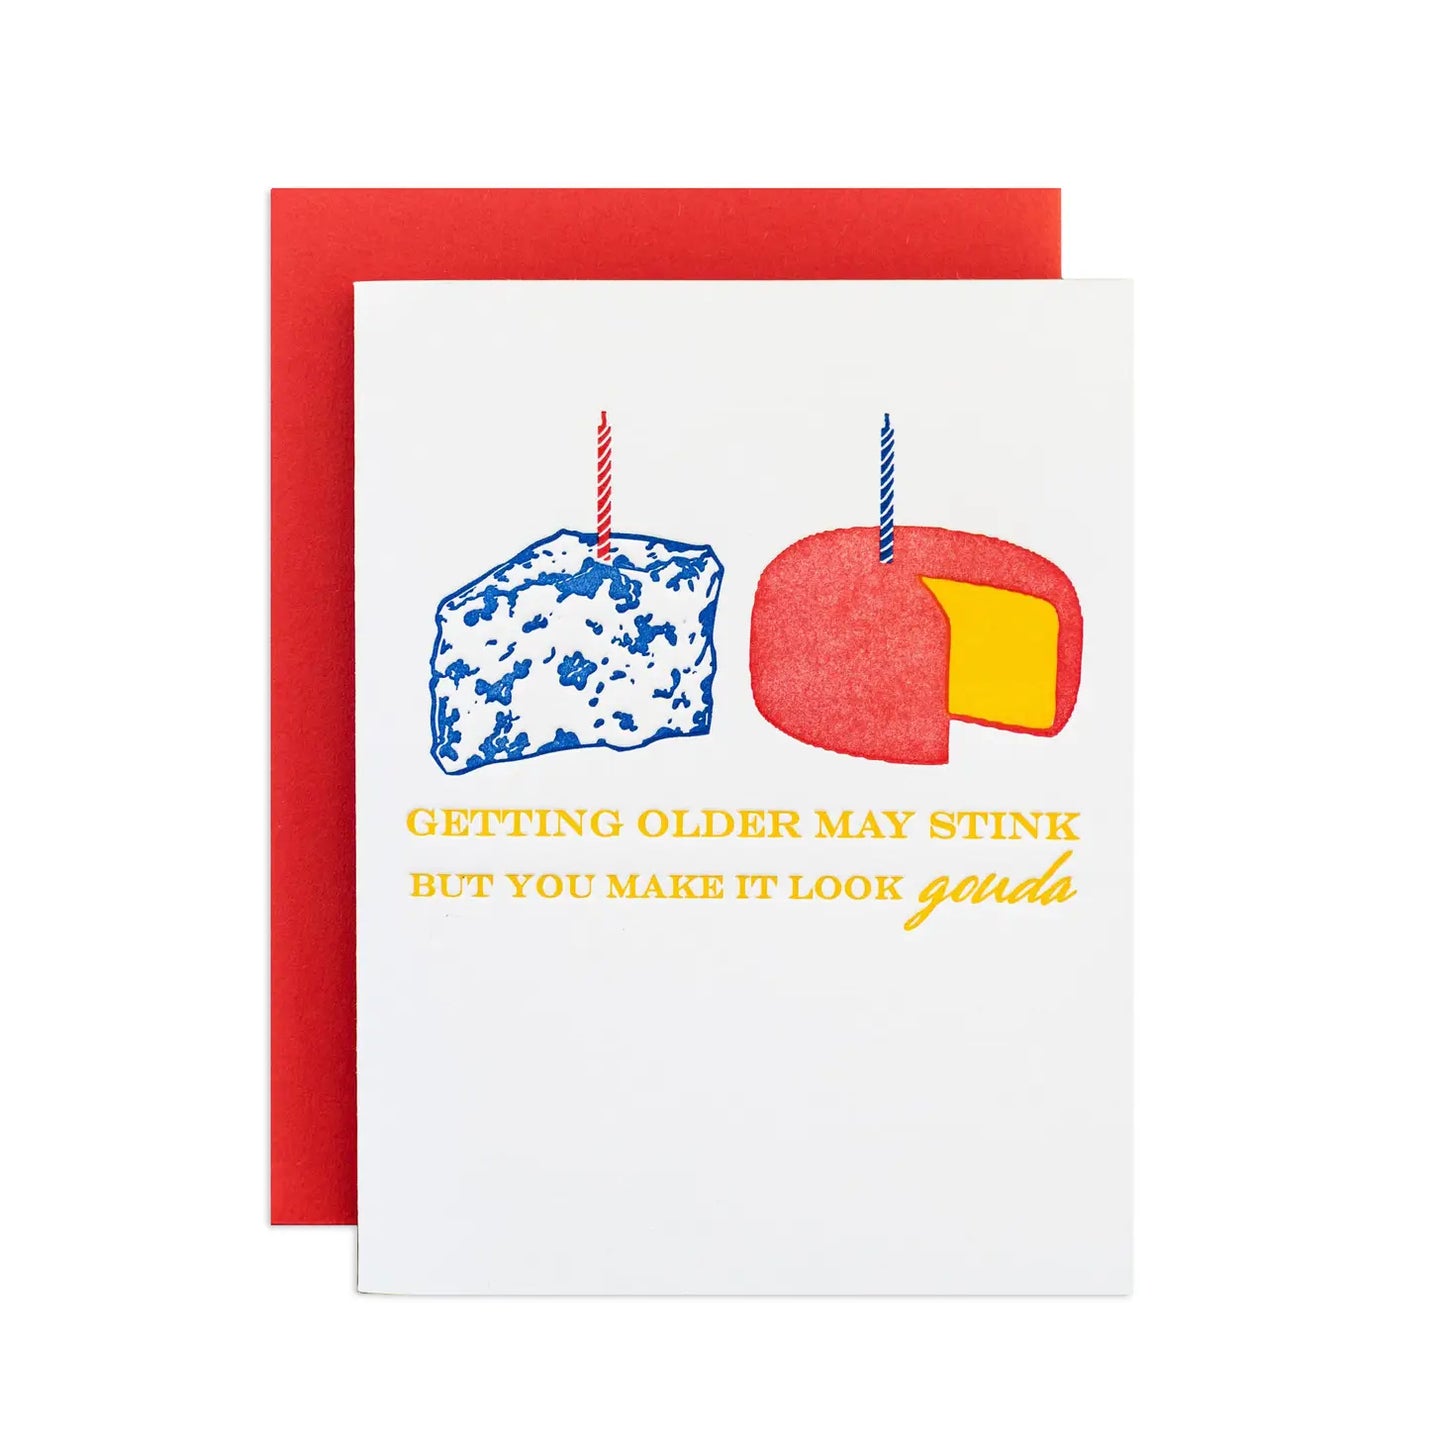 Cheese birthday greeting card -- card has two cheeses on it, each with a candle inside, and it reads "Getting Older May Stink But You Make It Look Gouda"